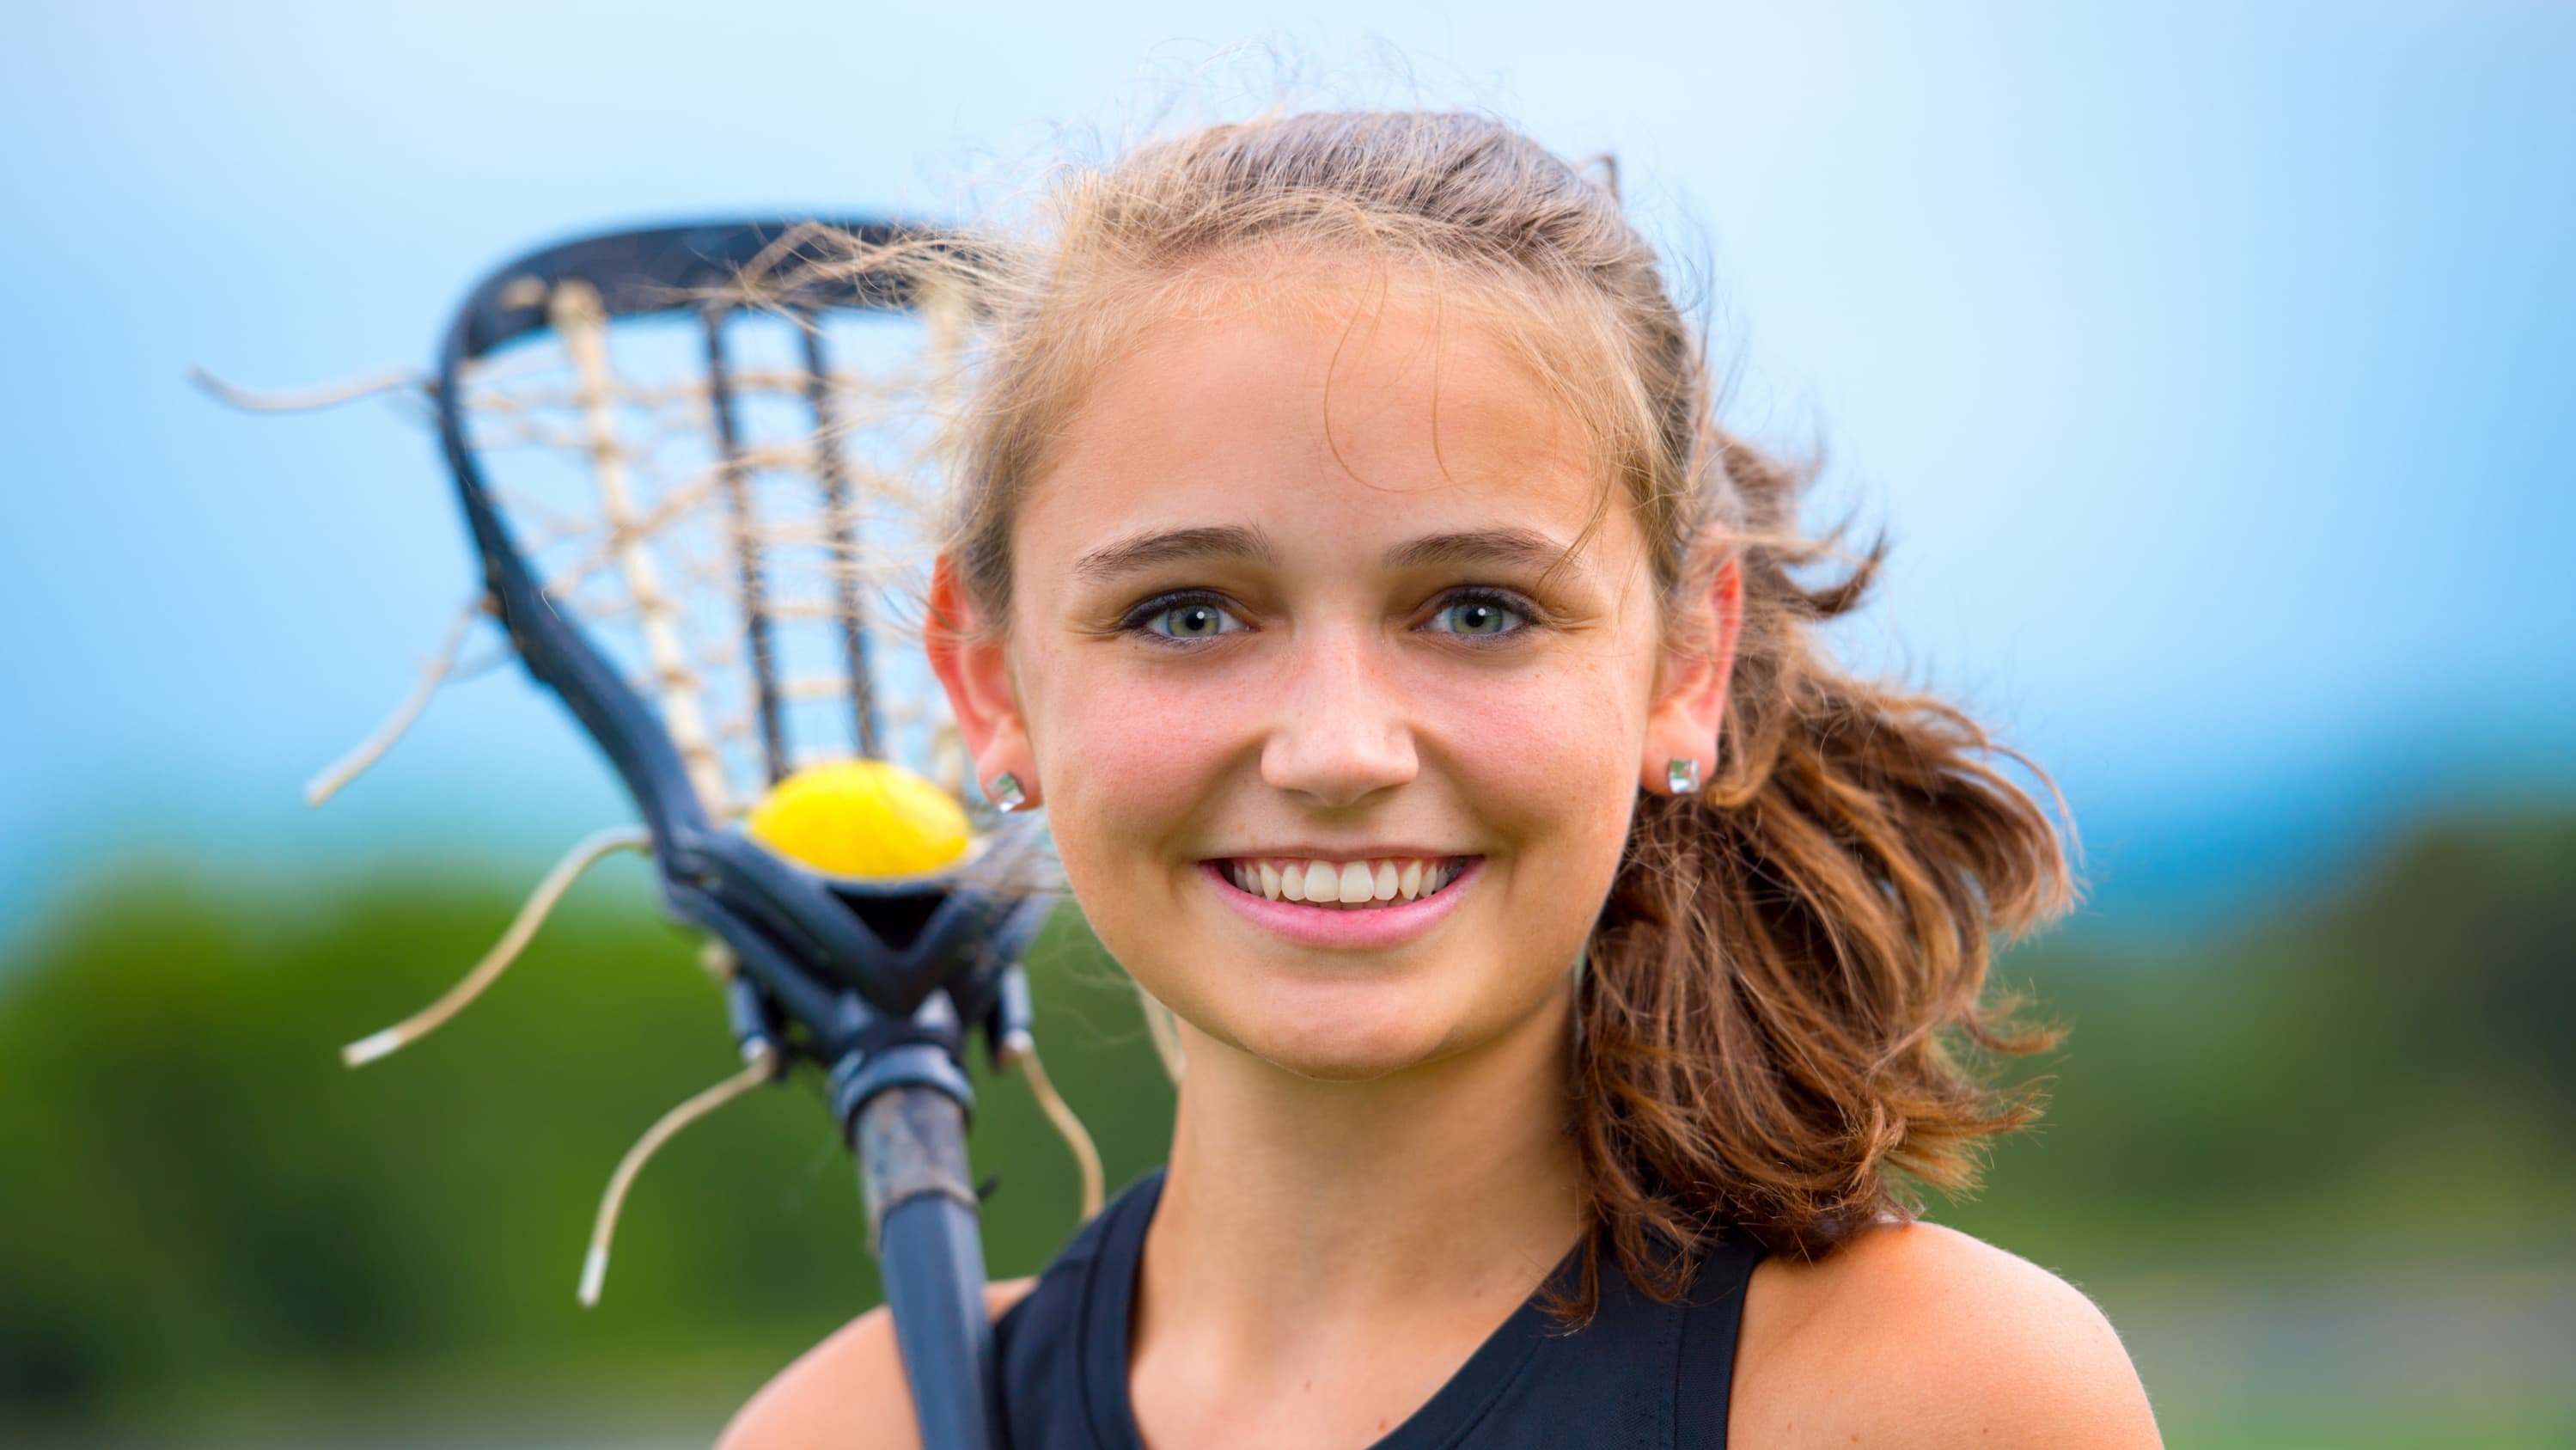 young lacrosse player